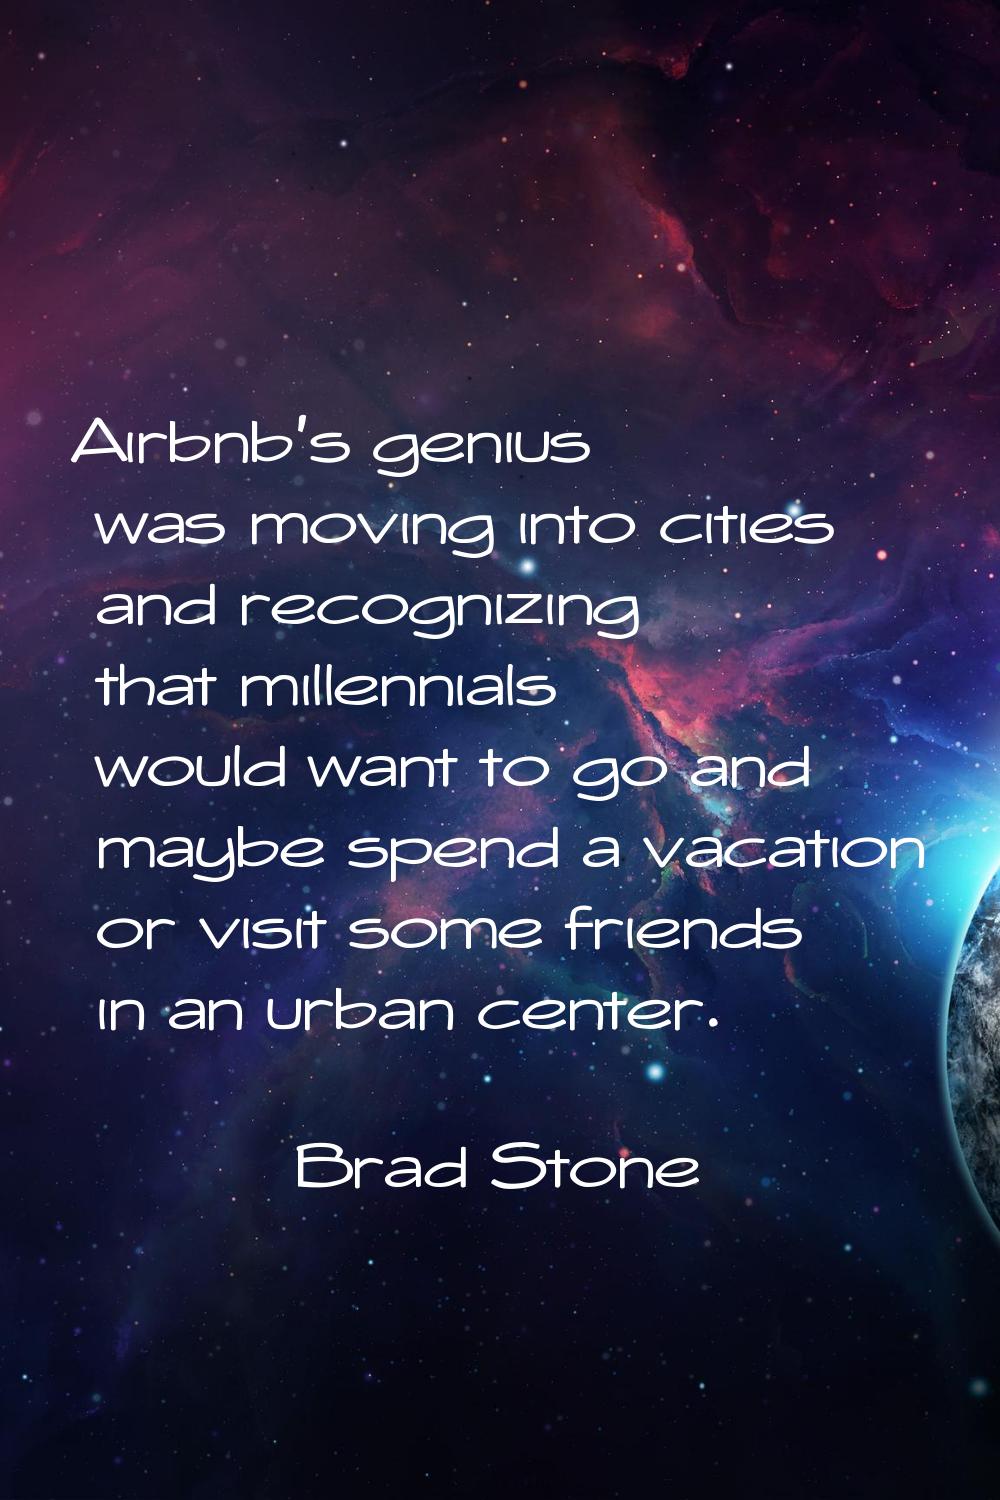 Airbnb's genius was moving into cities and recognizing that millennials would want to go and maybe 